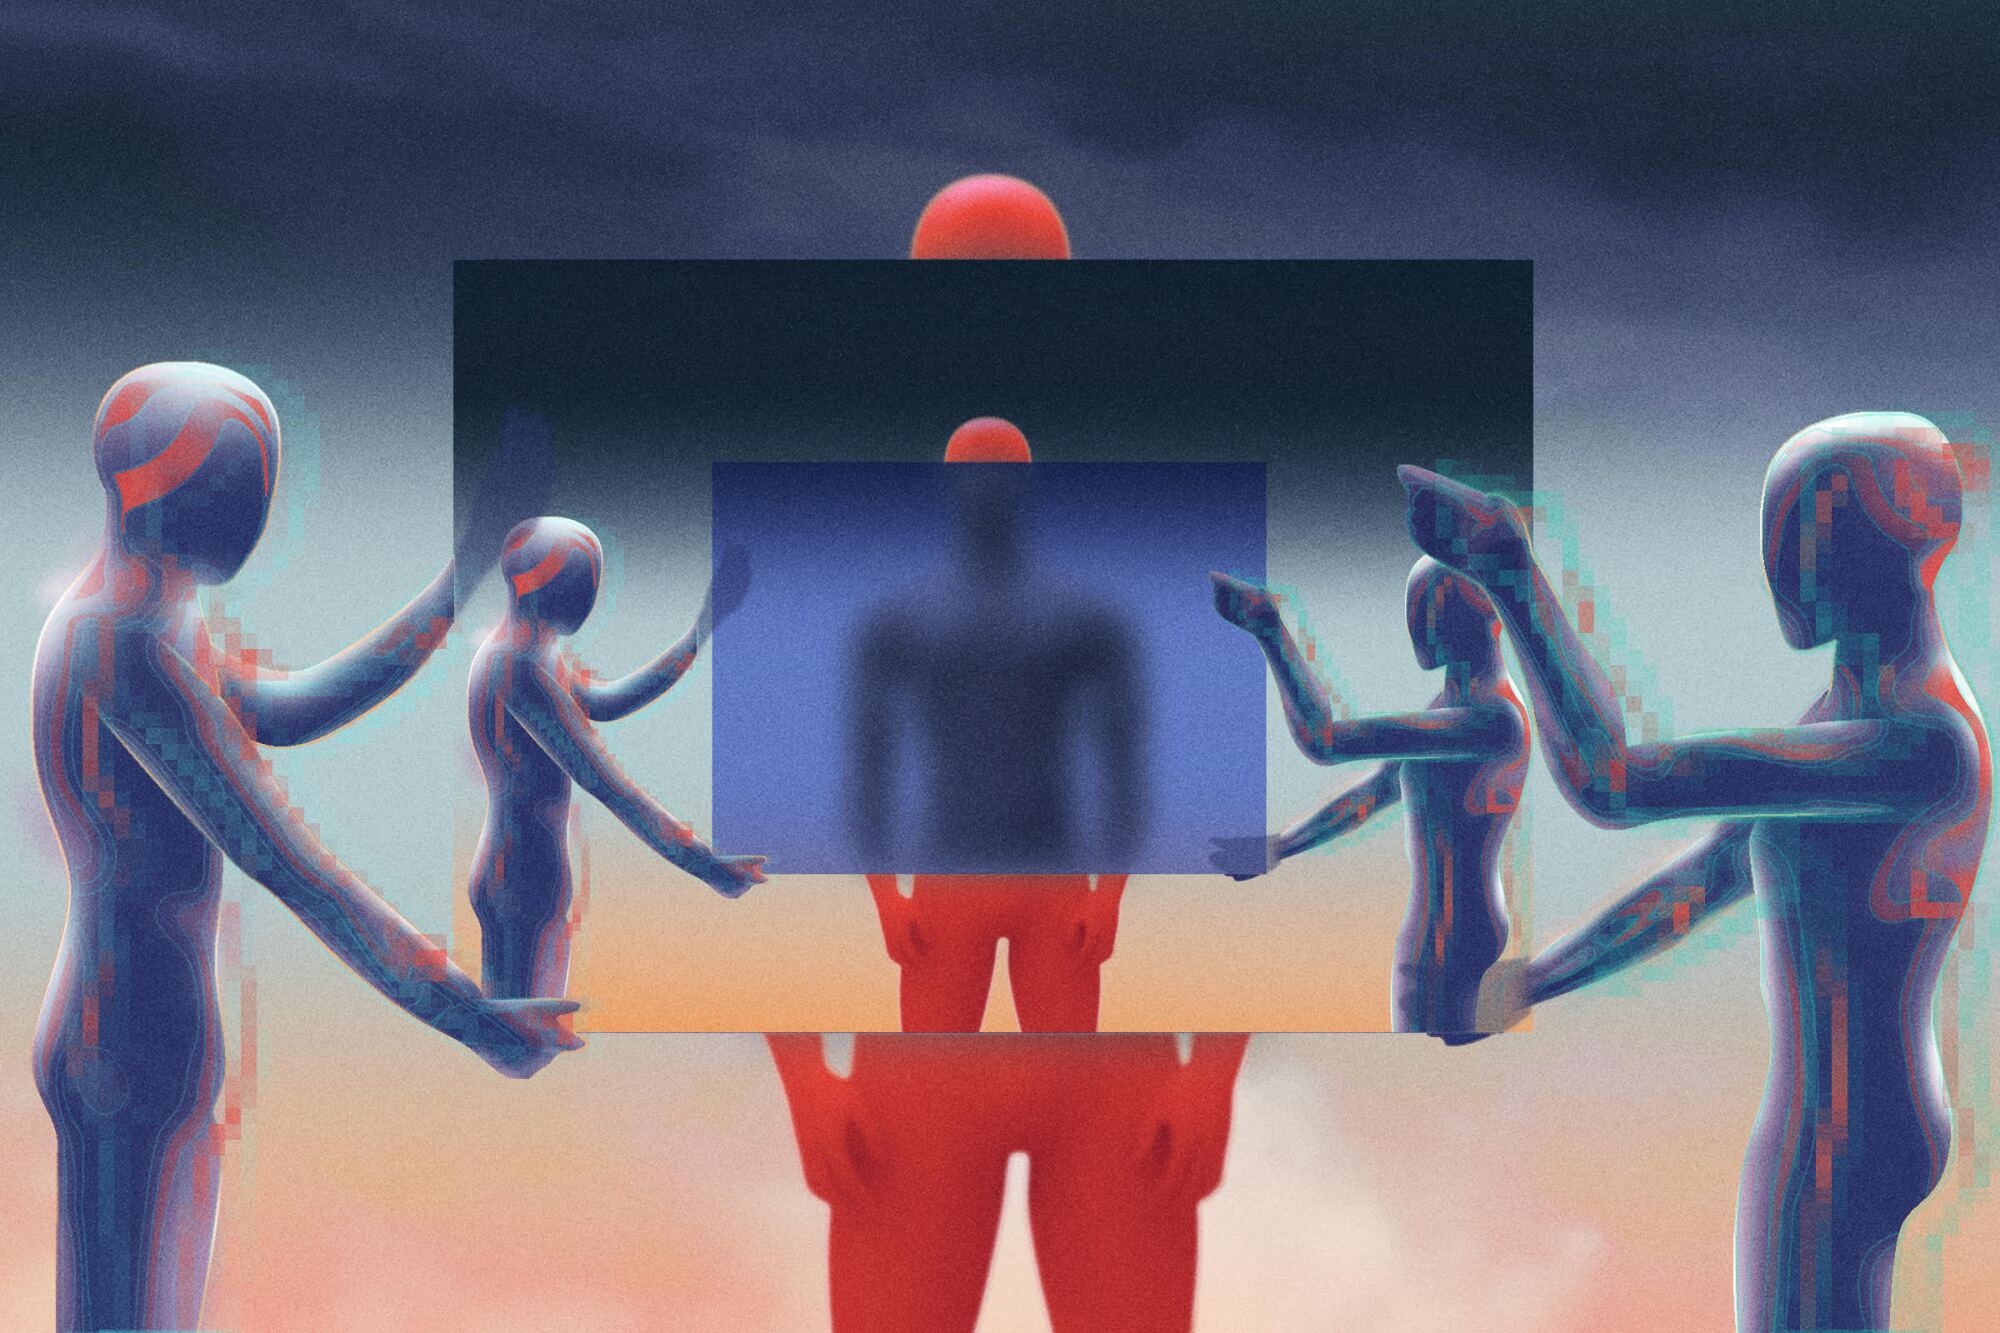 Two computer-generated figures hold up a frame showing two more figures holding a frame obscuring a large red blurry figure